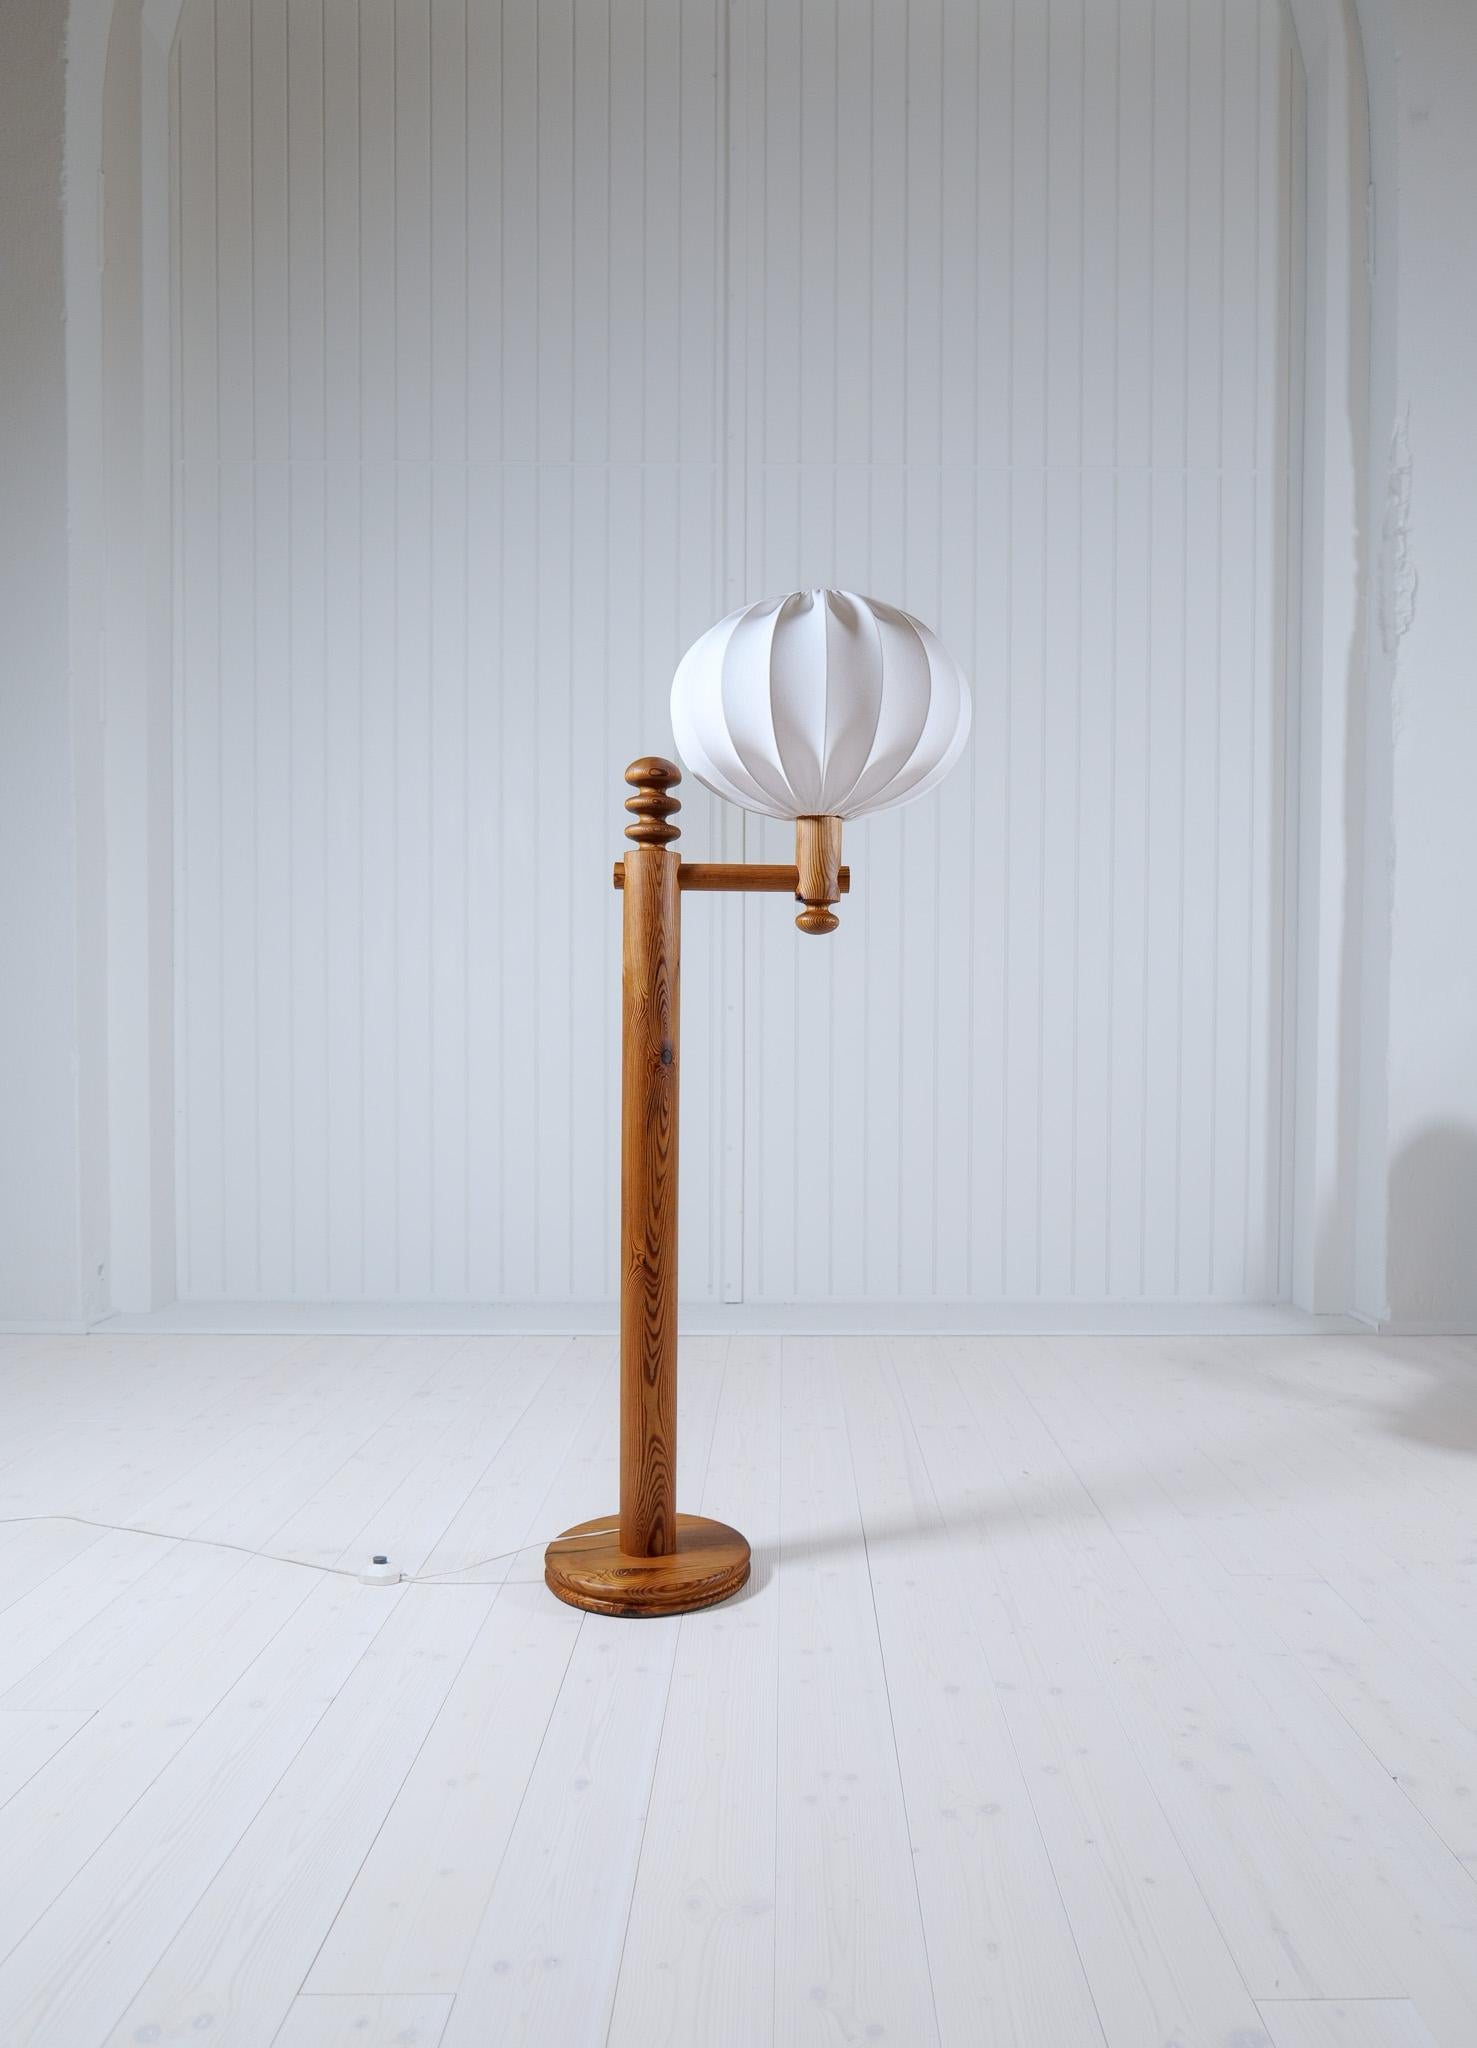 Floor lamp manufactured in Sweden and designed by Uno Kristiansson. Made in solid pine this one with its organic shape gives any home a nice vibe. 
All new cotton shade is included. 

Nice vintage condition.

Dimensions: Height 142cm, base 30cm